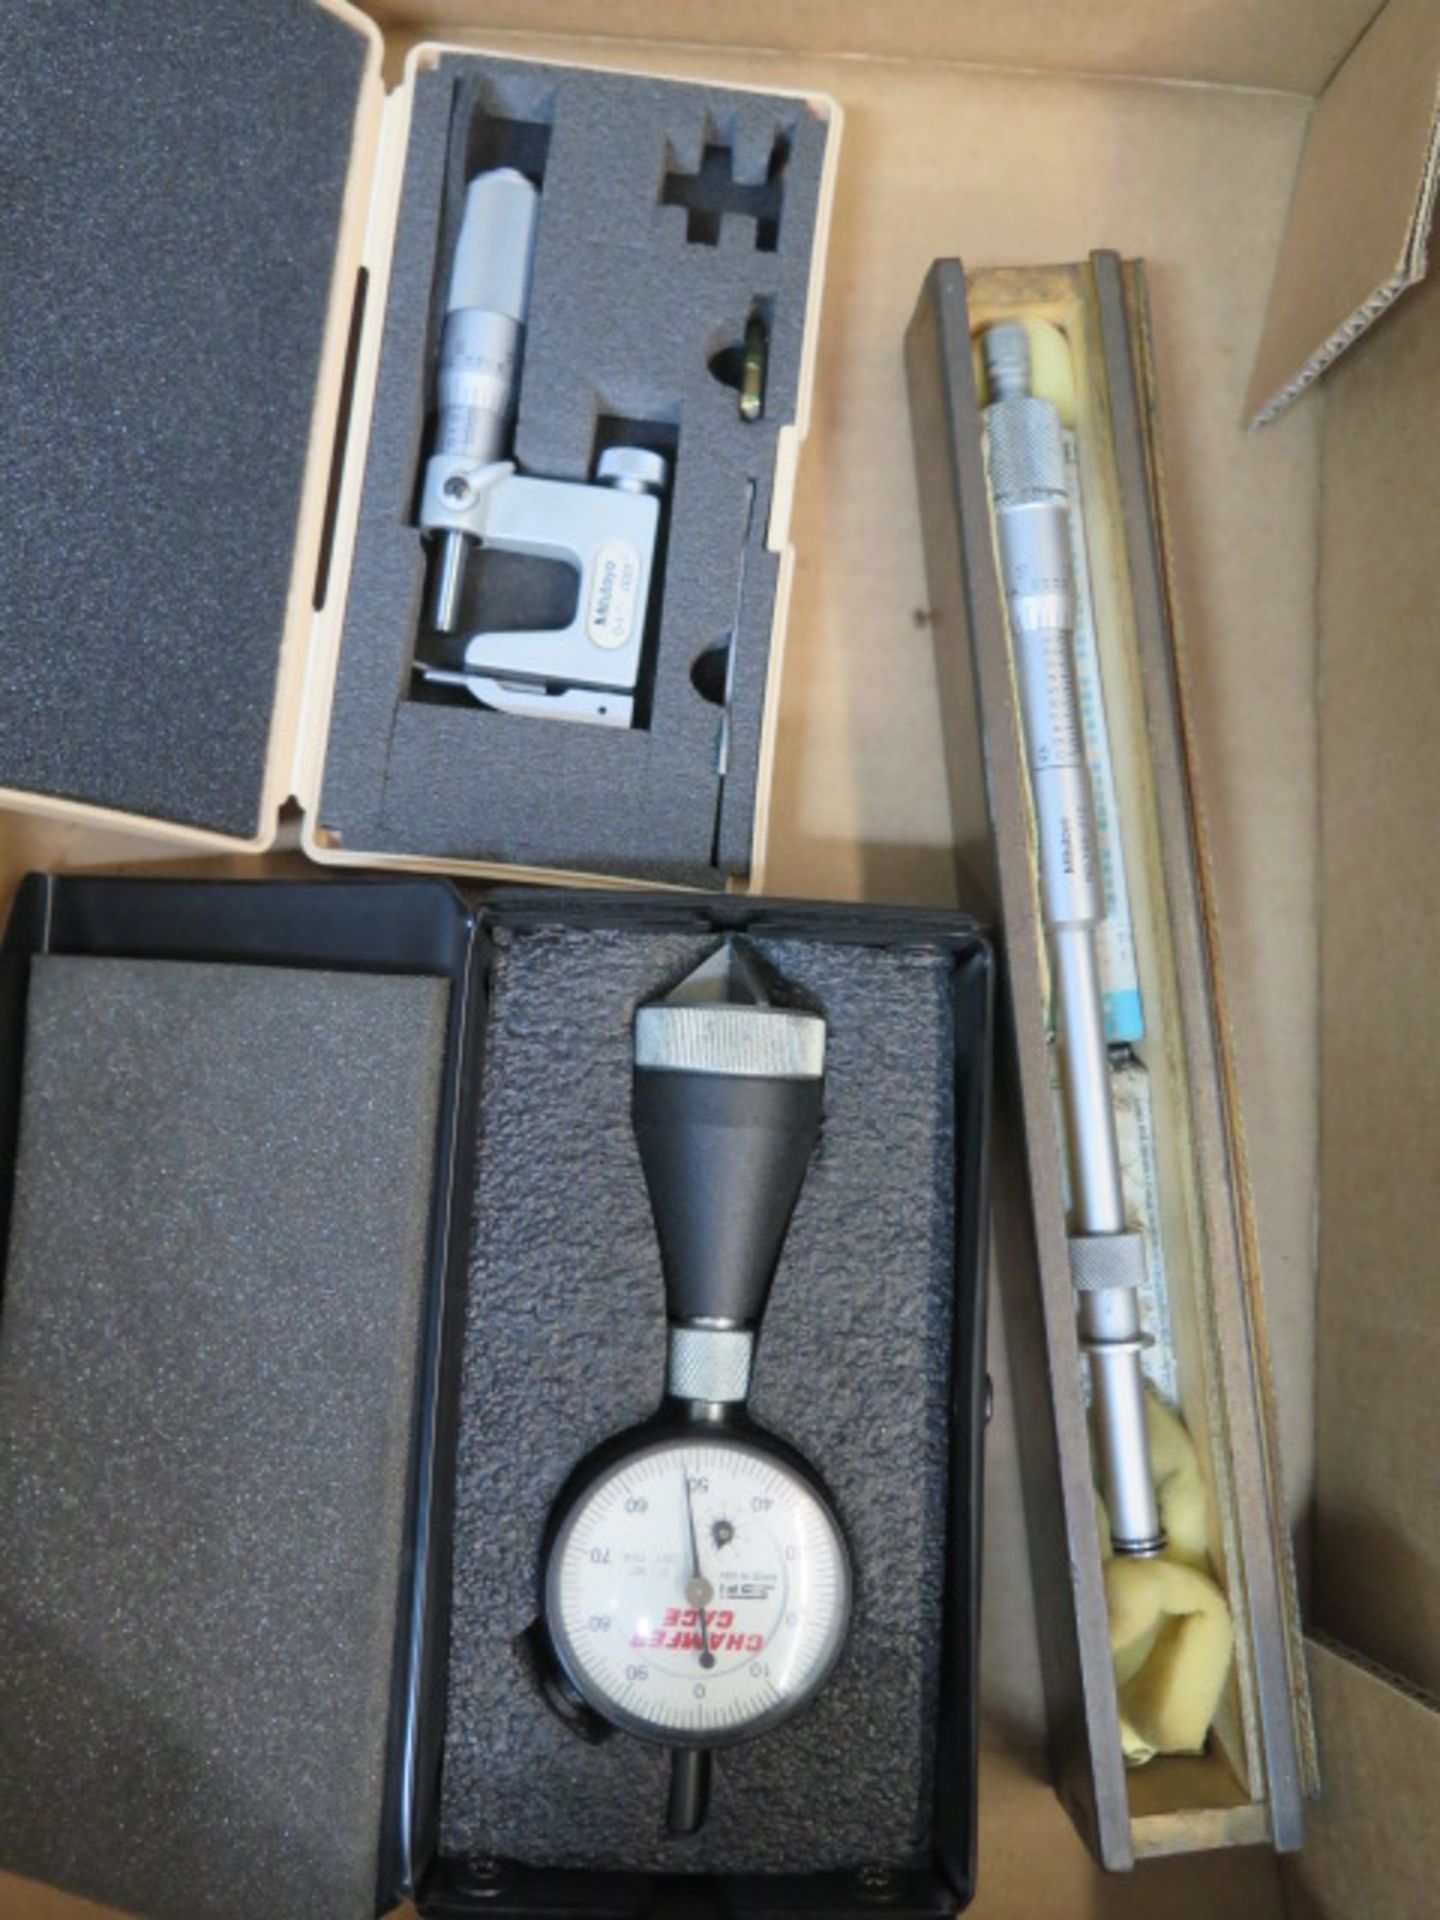 SPI Dial Chamfer Gage, Mitutoyo 0-1" Anvil Mic and Mitutoyo 0-1" Step Mic - Image 2 of 2